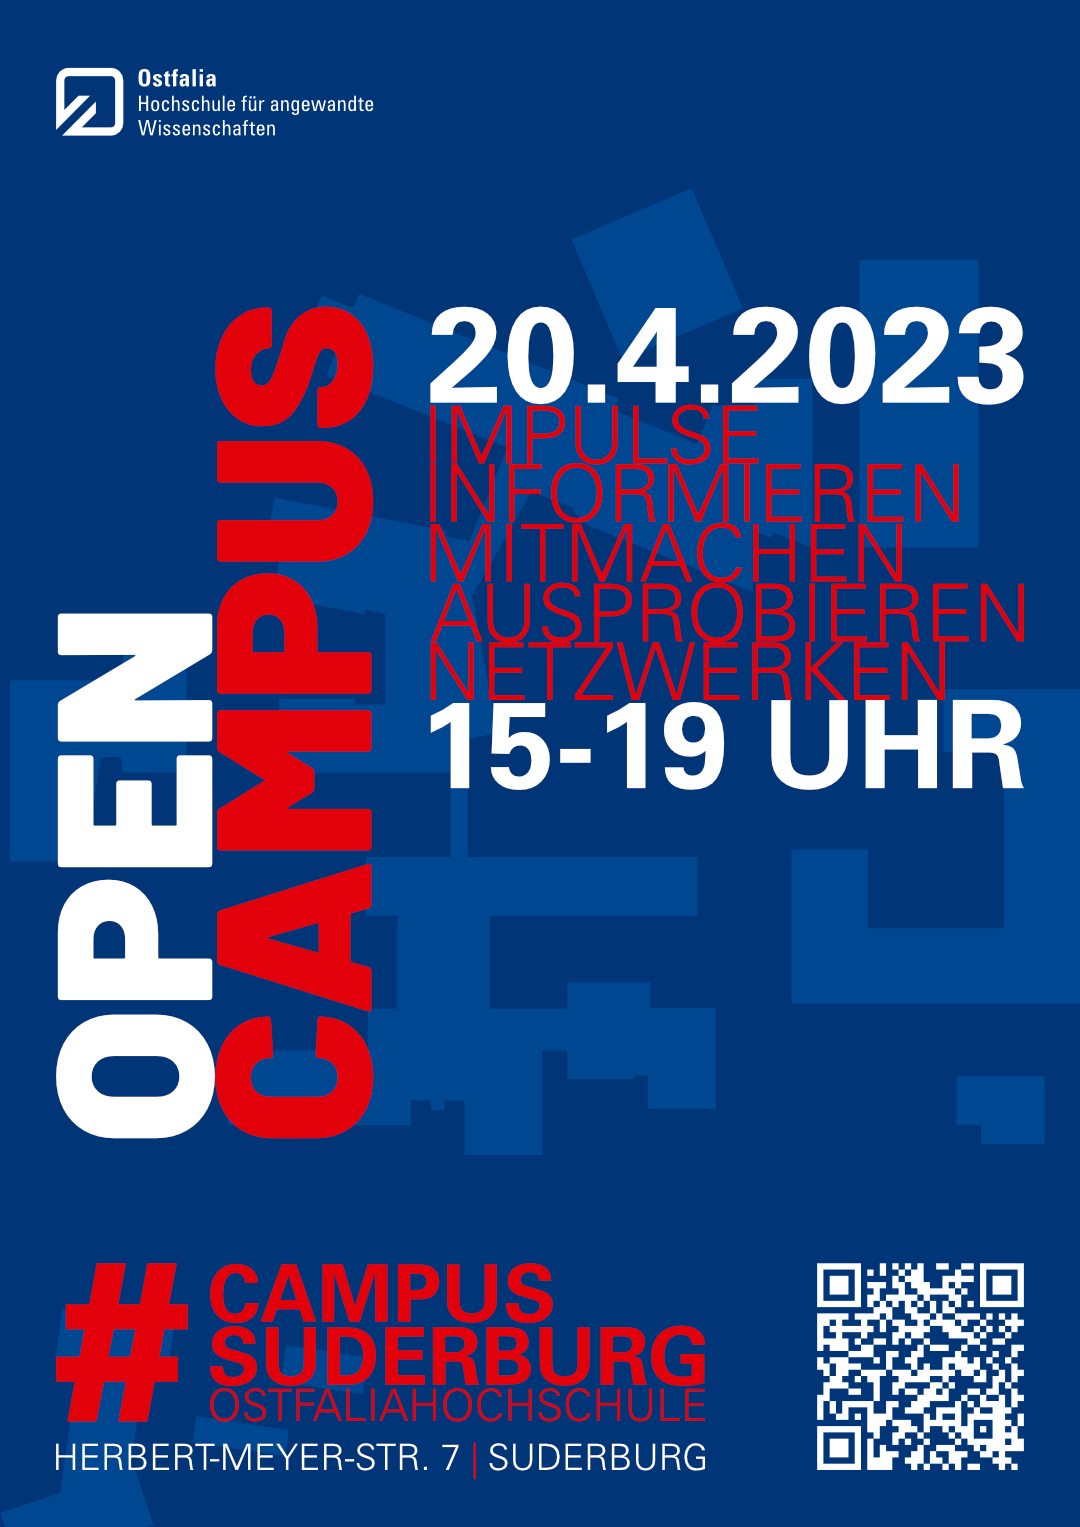 OF_SUD_Open Campus A3-Plakat